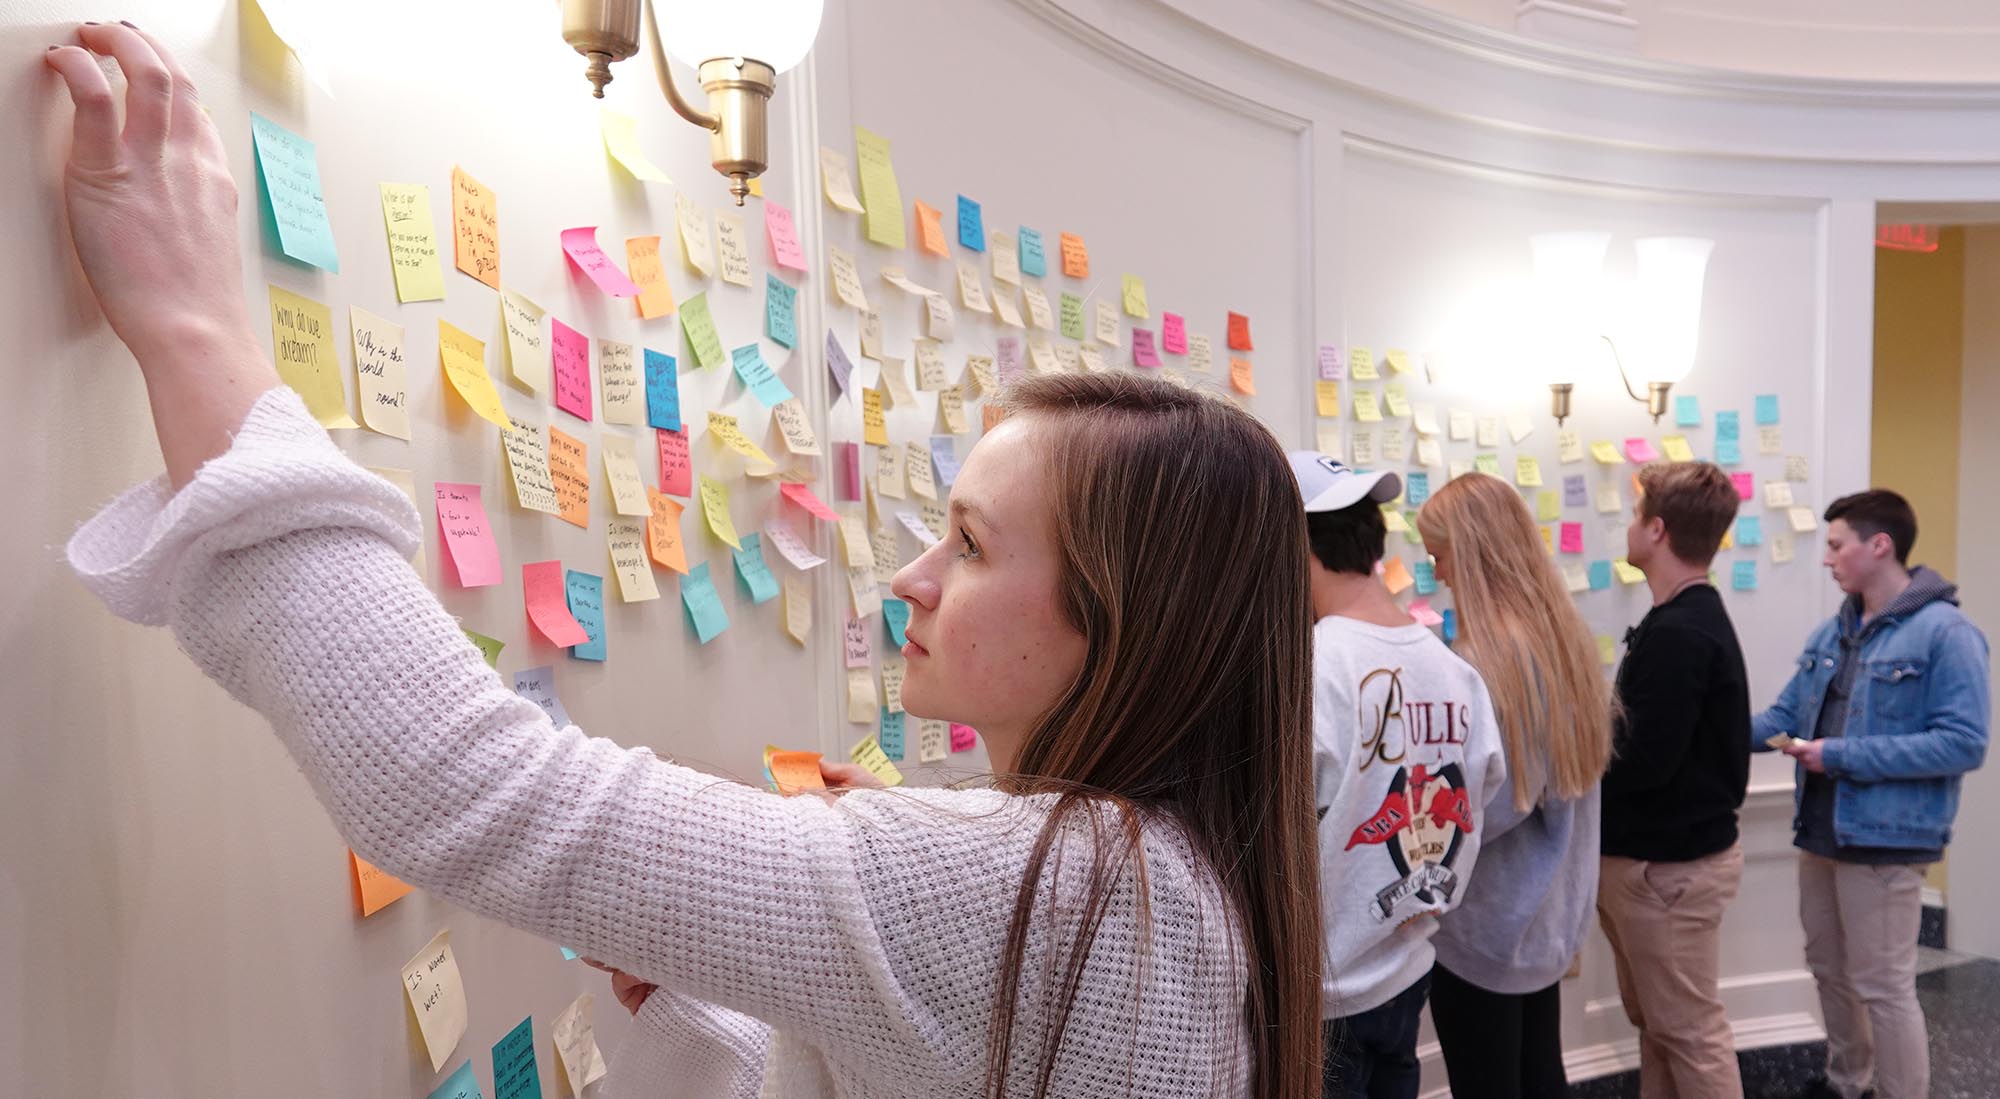 Students begin removing Post-It notes from the wall as the project ends